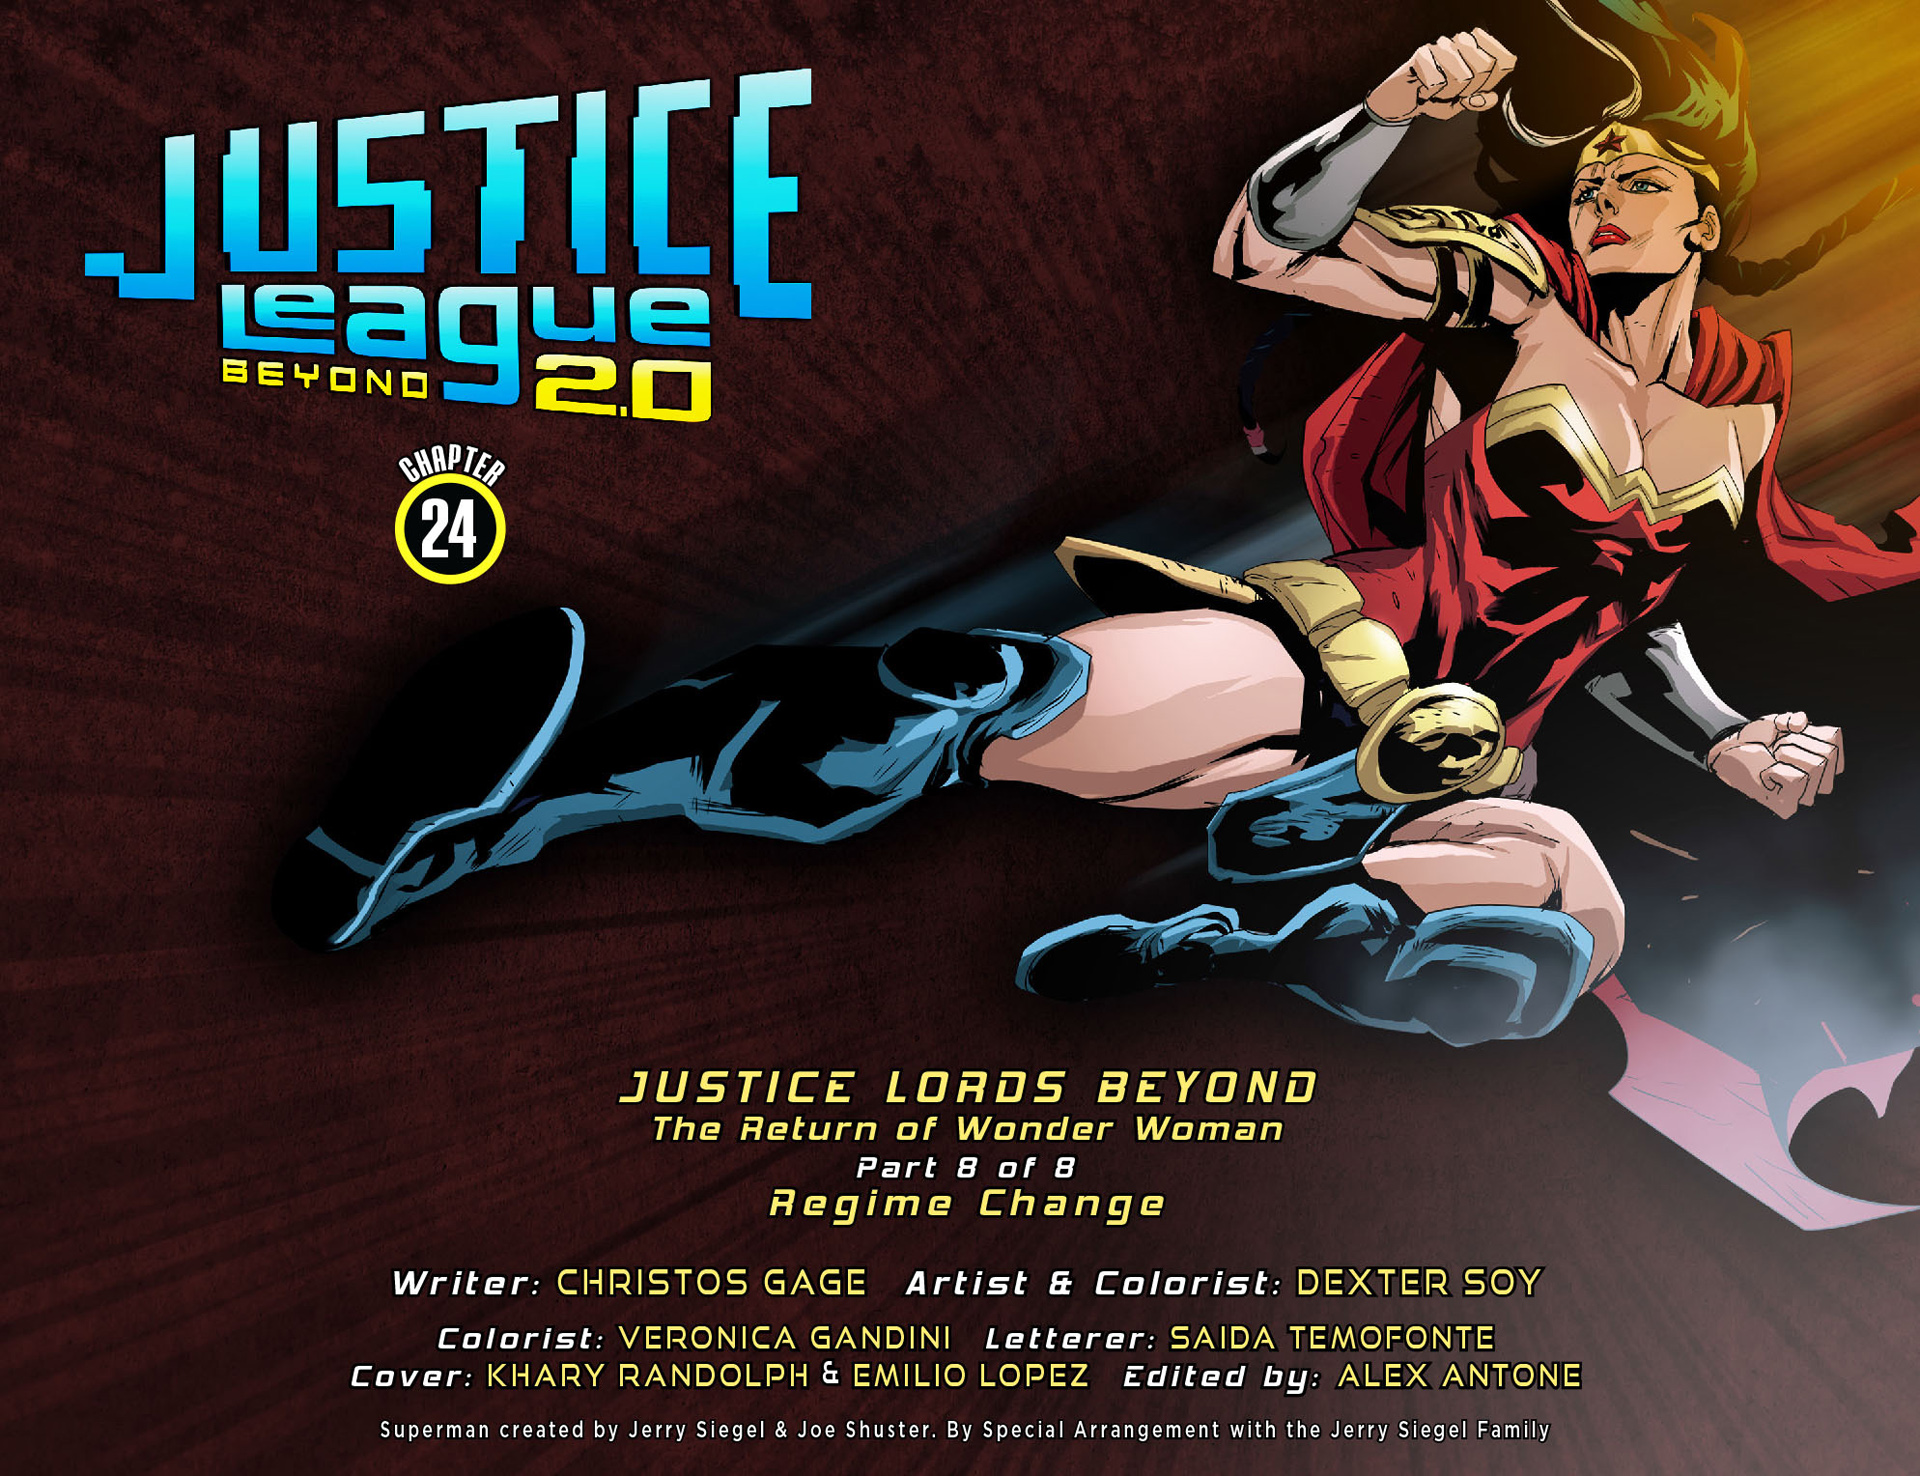 Read online Justice League Beyond 2.0 comic -  Issue #24 - 2